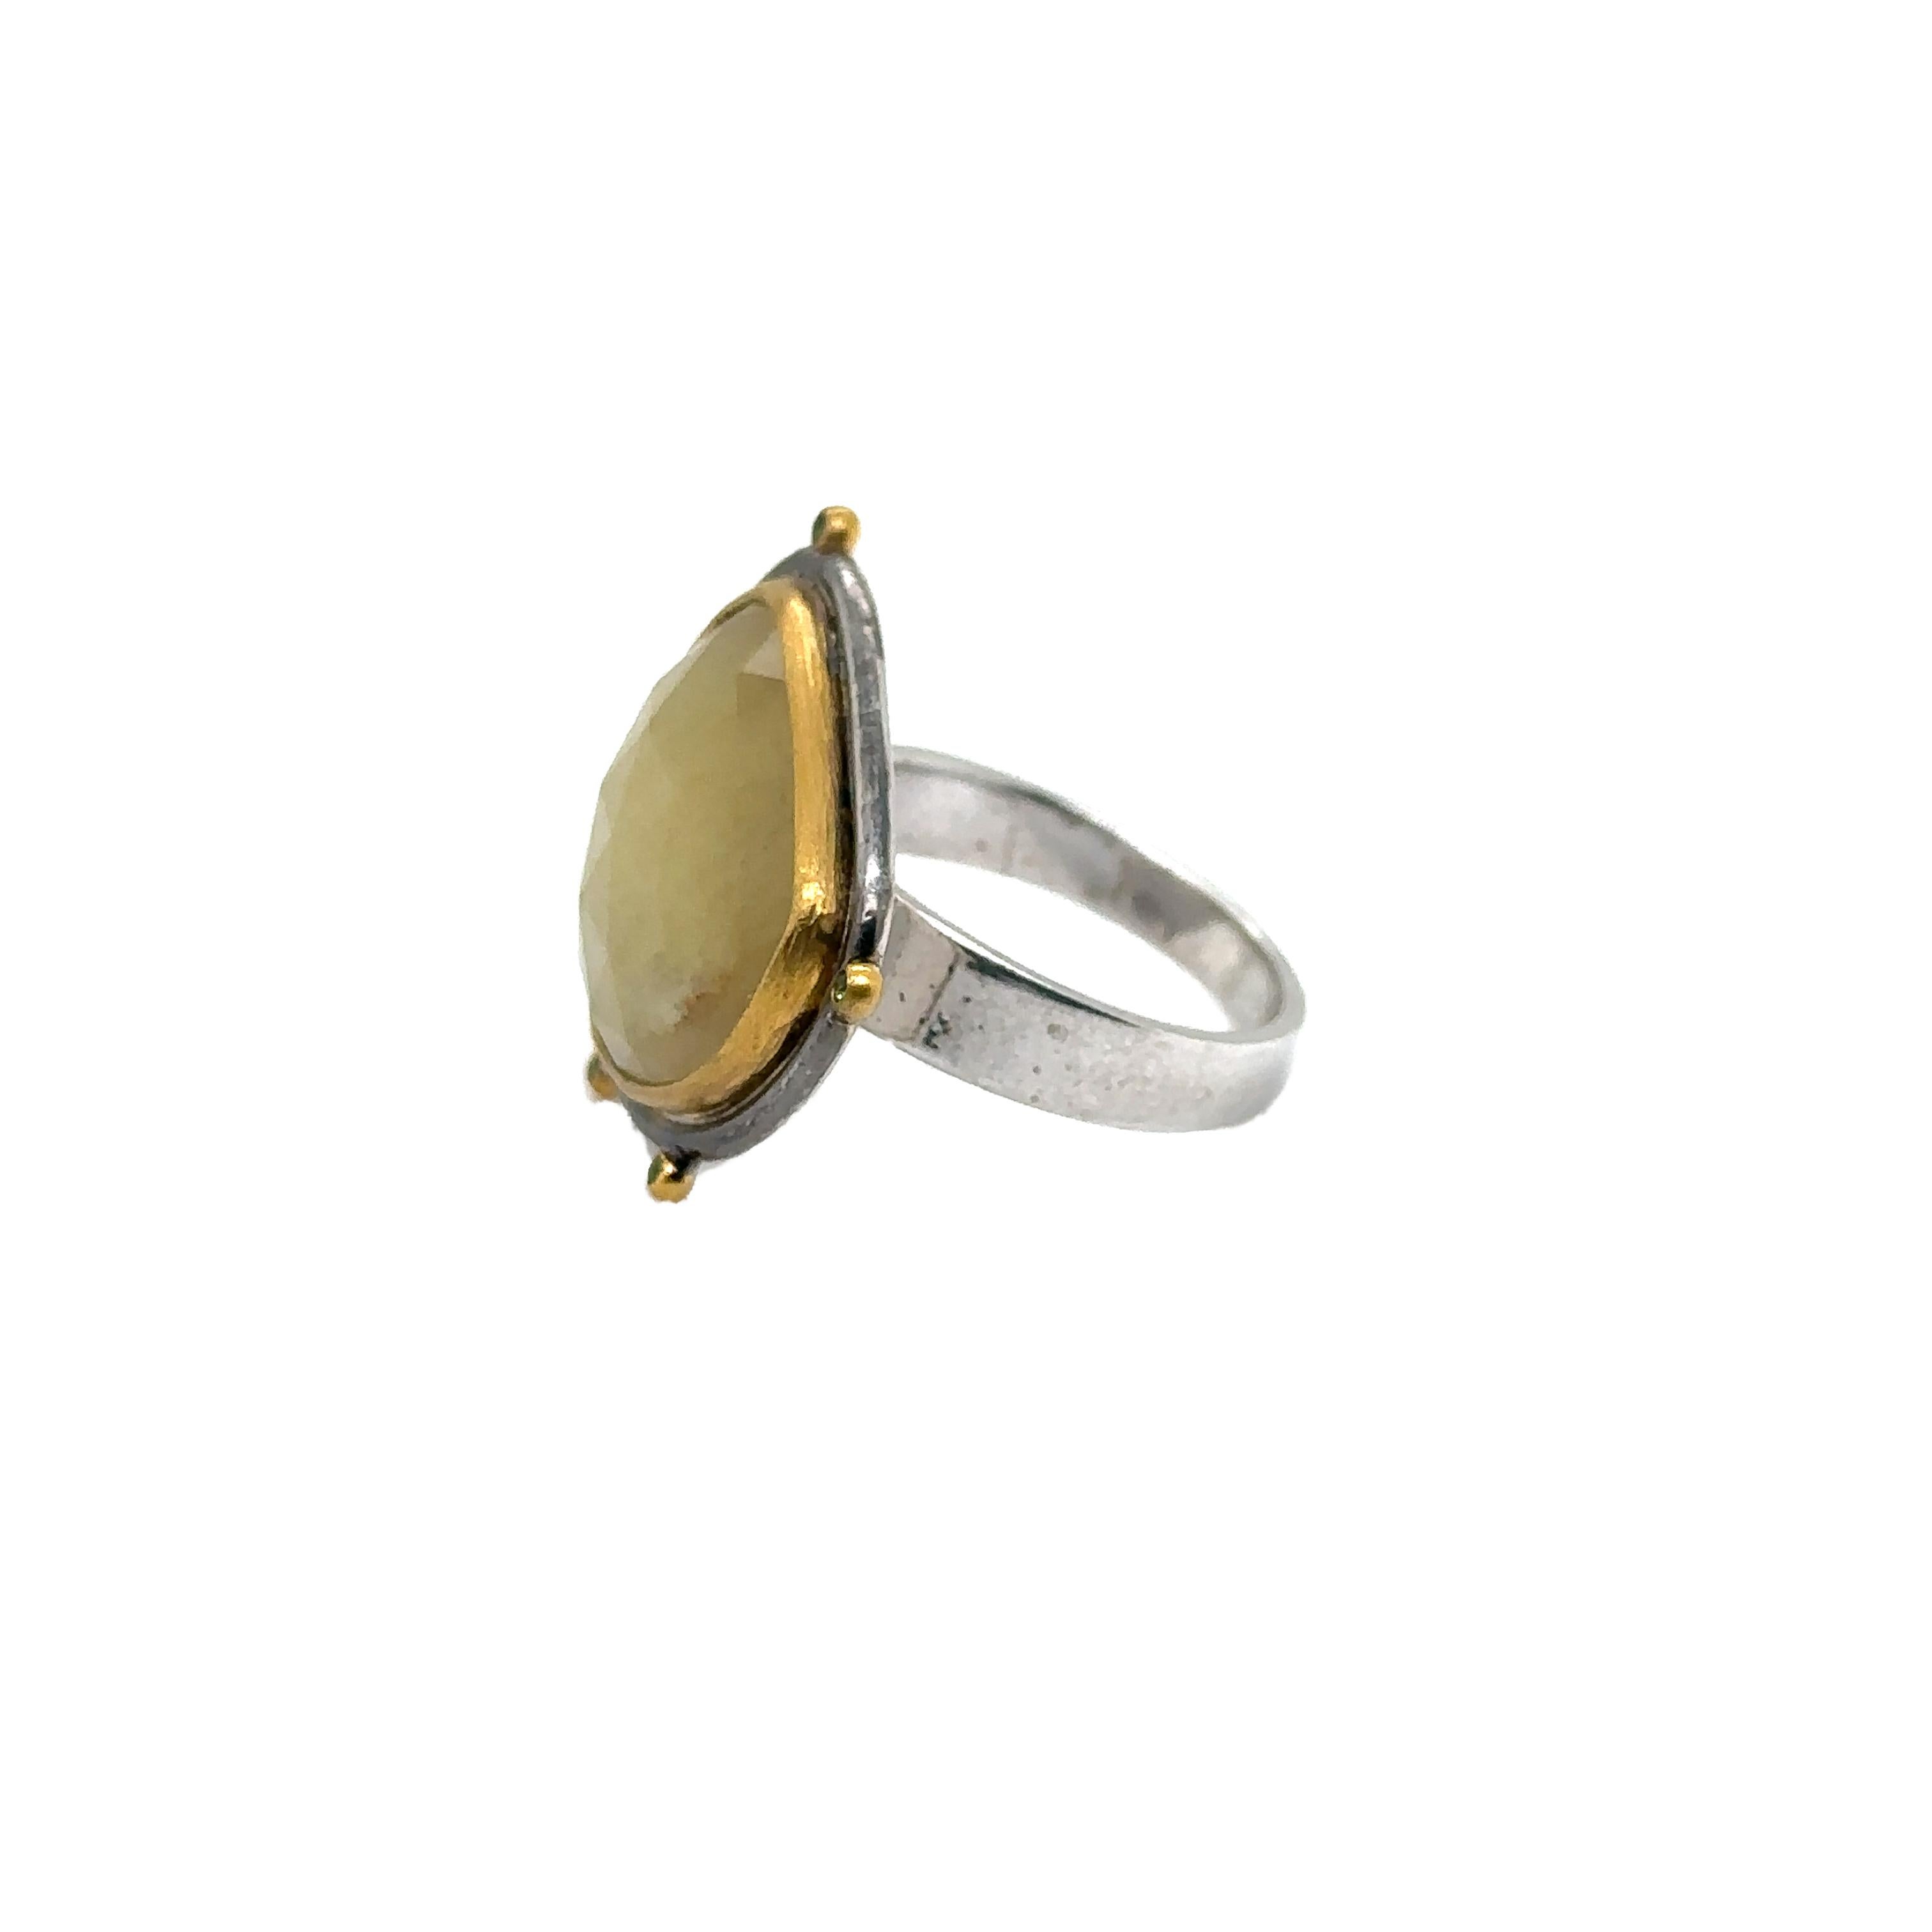 JAS-19-1835 - 24K/SS HANDMADE RING w CHROME DIOPSIDES & NATURAL YELLOW SAPPHIRE For Sale 6